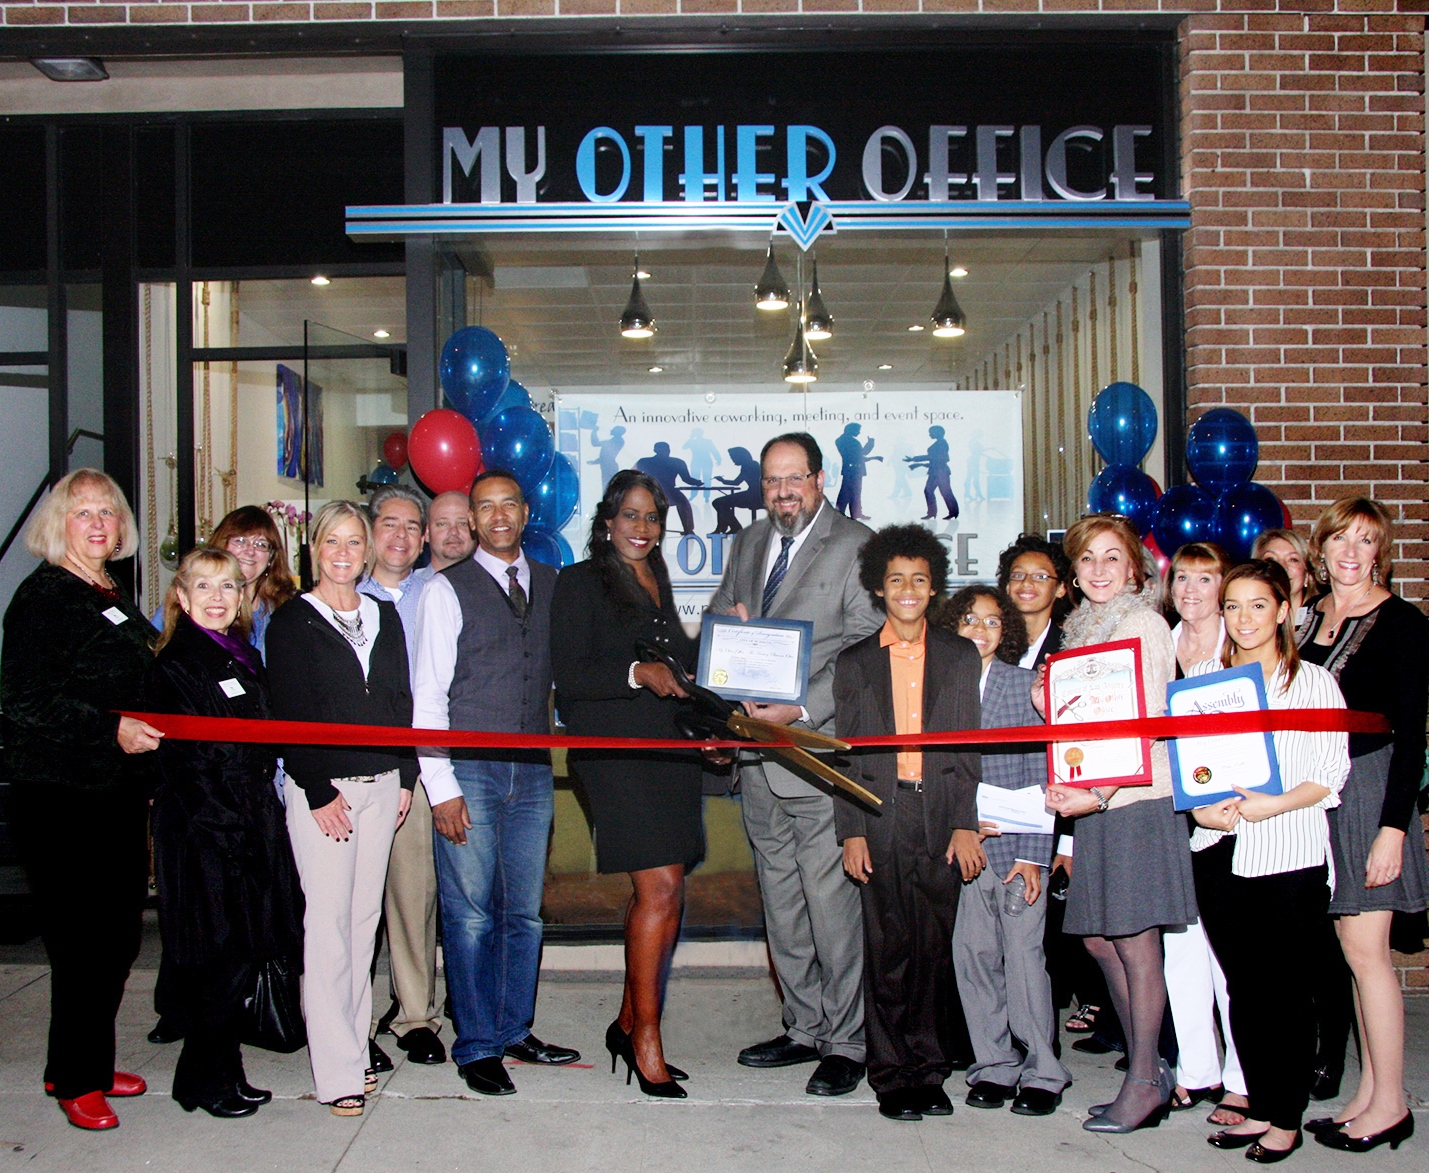 My Other Office - Official Ribbon Cutting Ceremony sponsored by The Burbank Chamber of Commerce - January 2015 